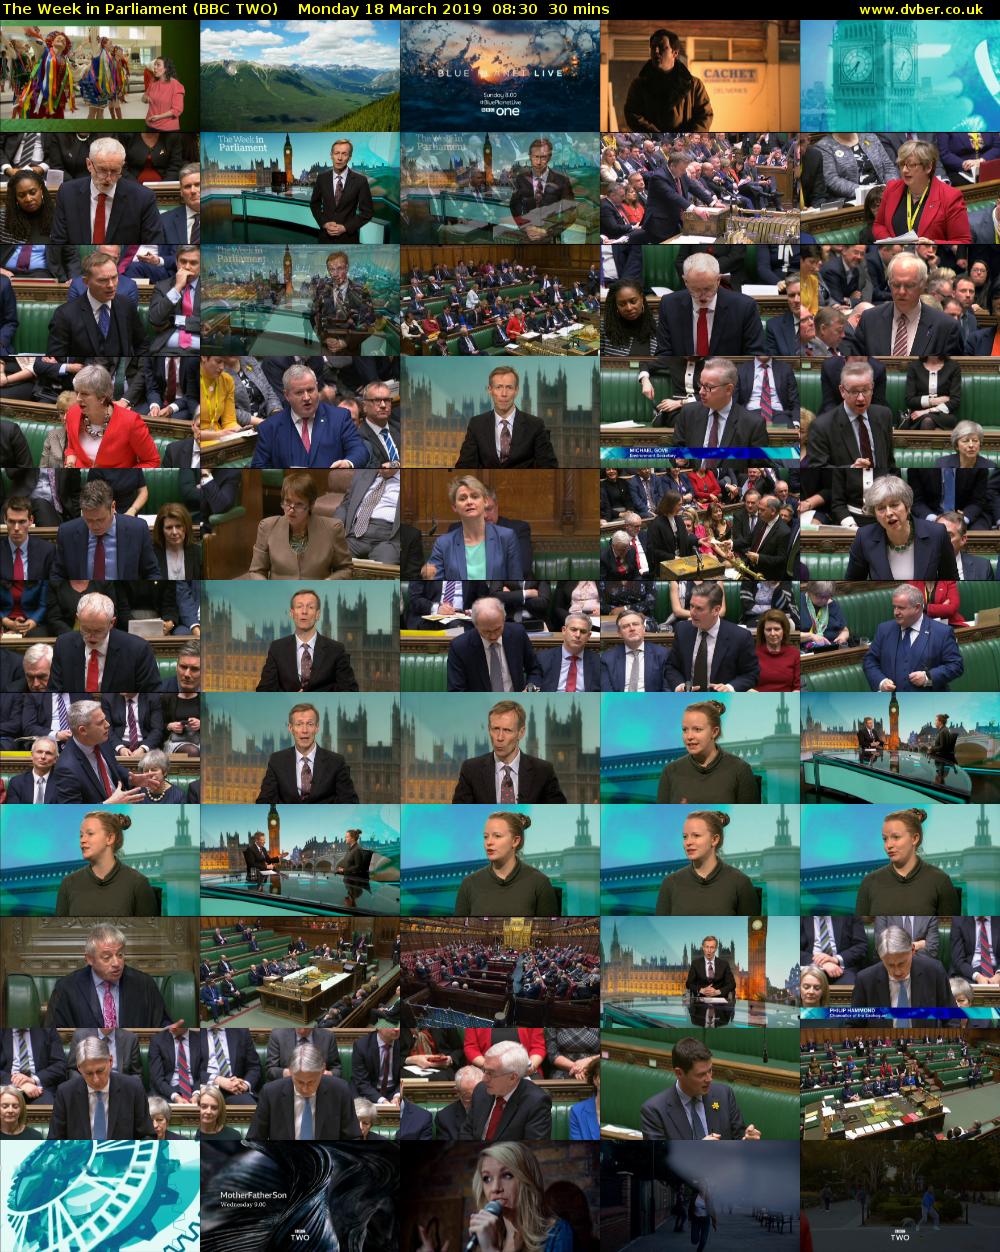 The Week in Parliament (BBC TWO) Monday 18 March 2019 08:30 - 09:00